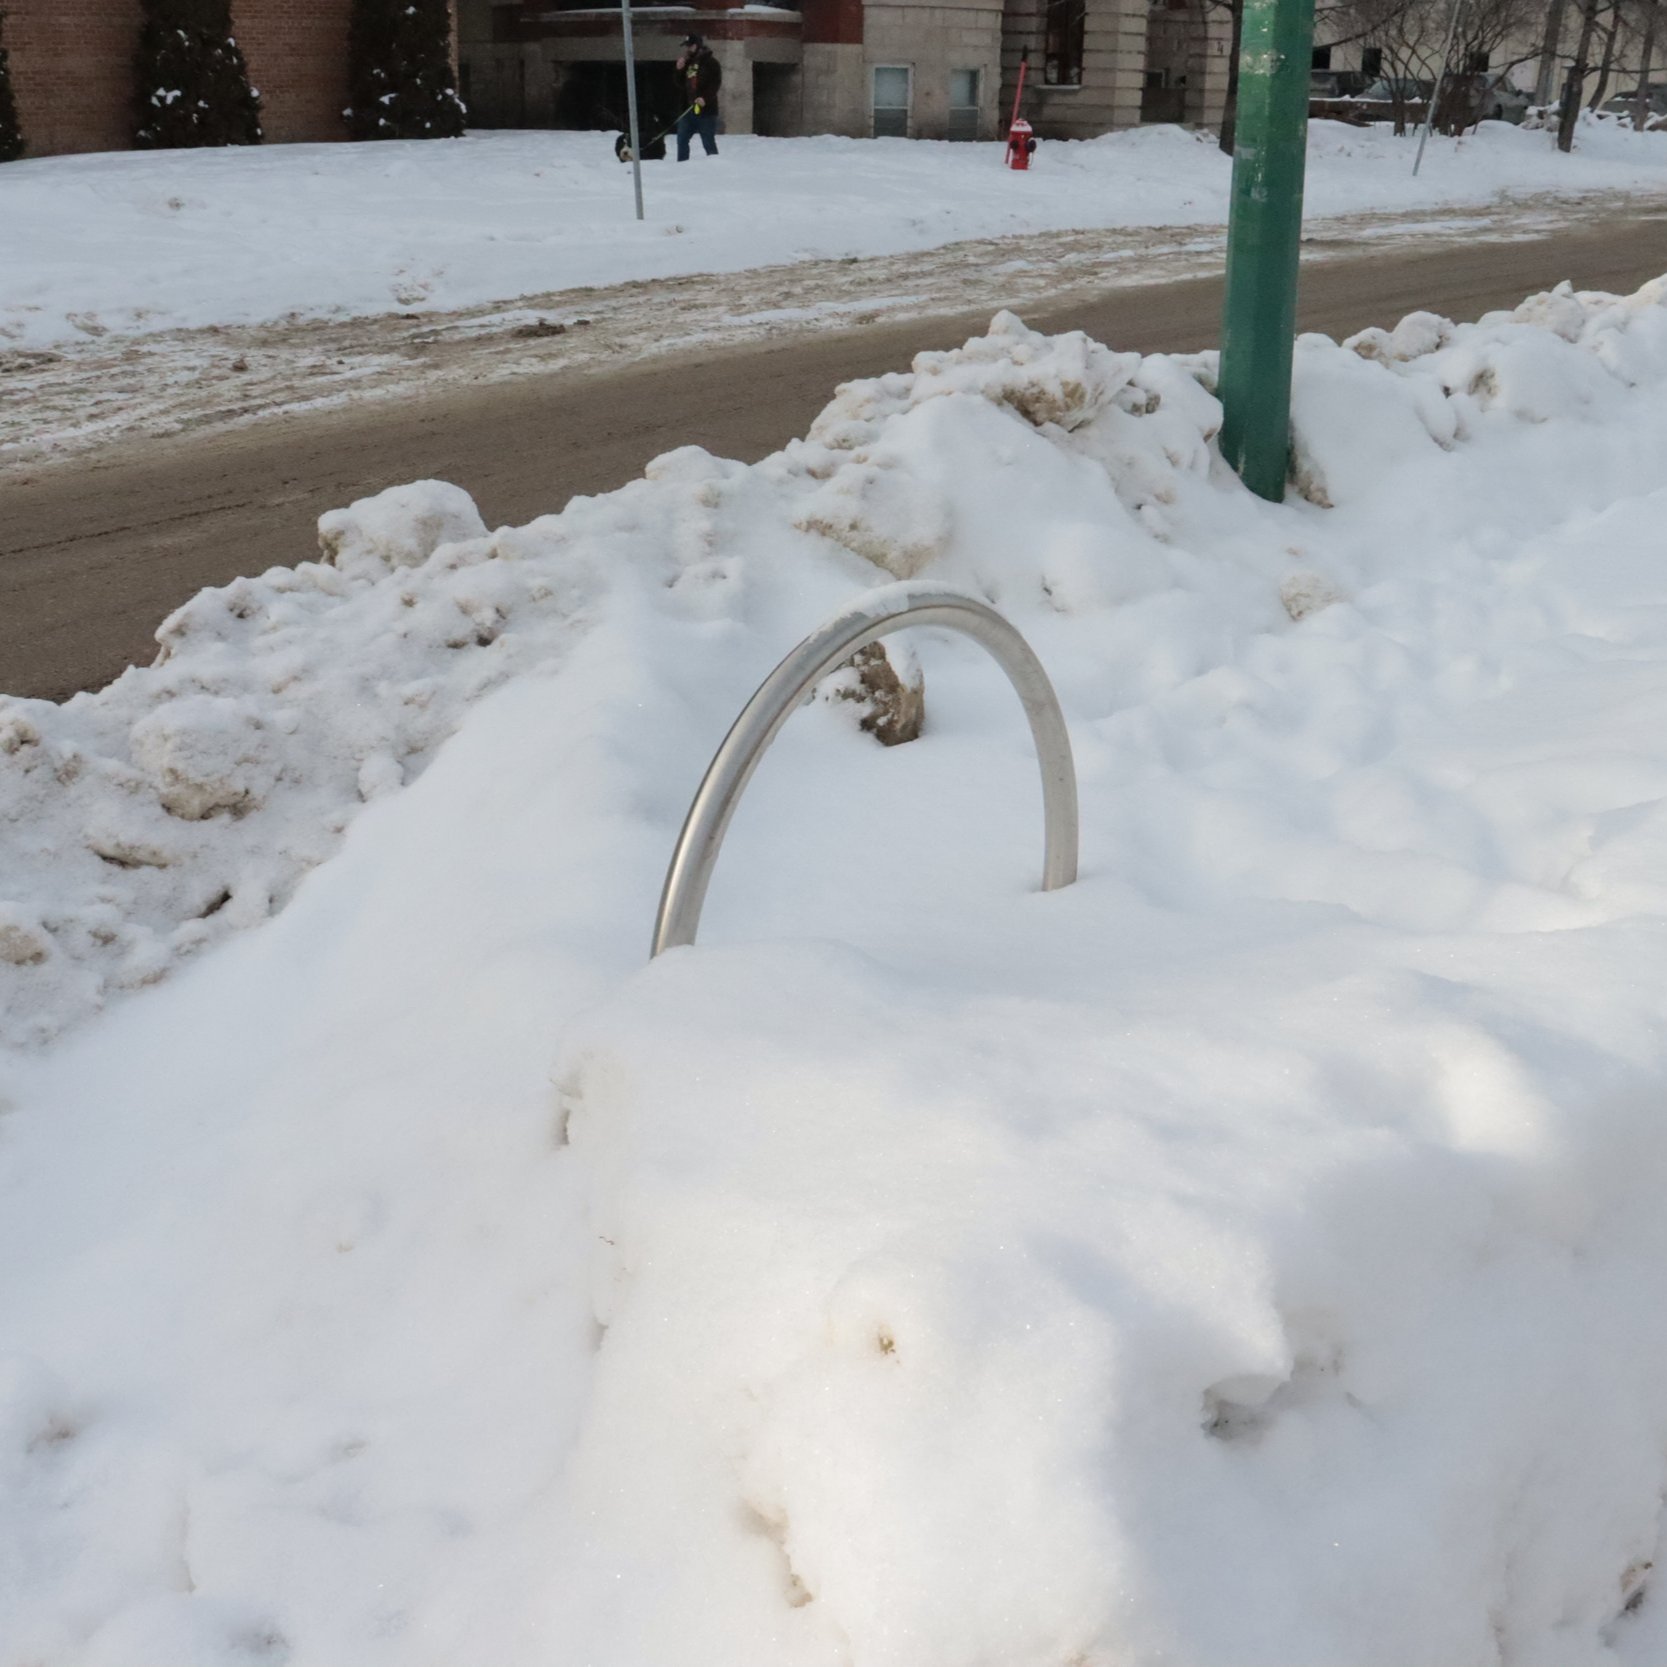 Bike parking is not maintained in winter